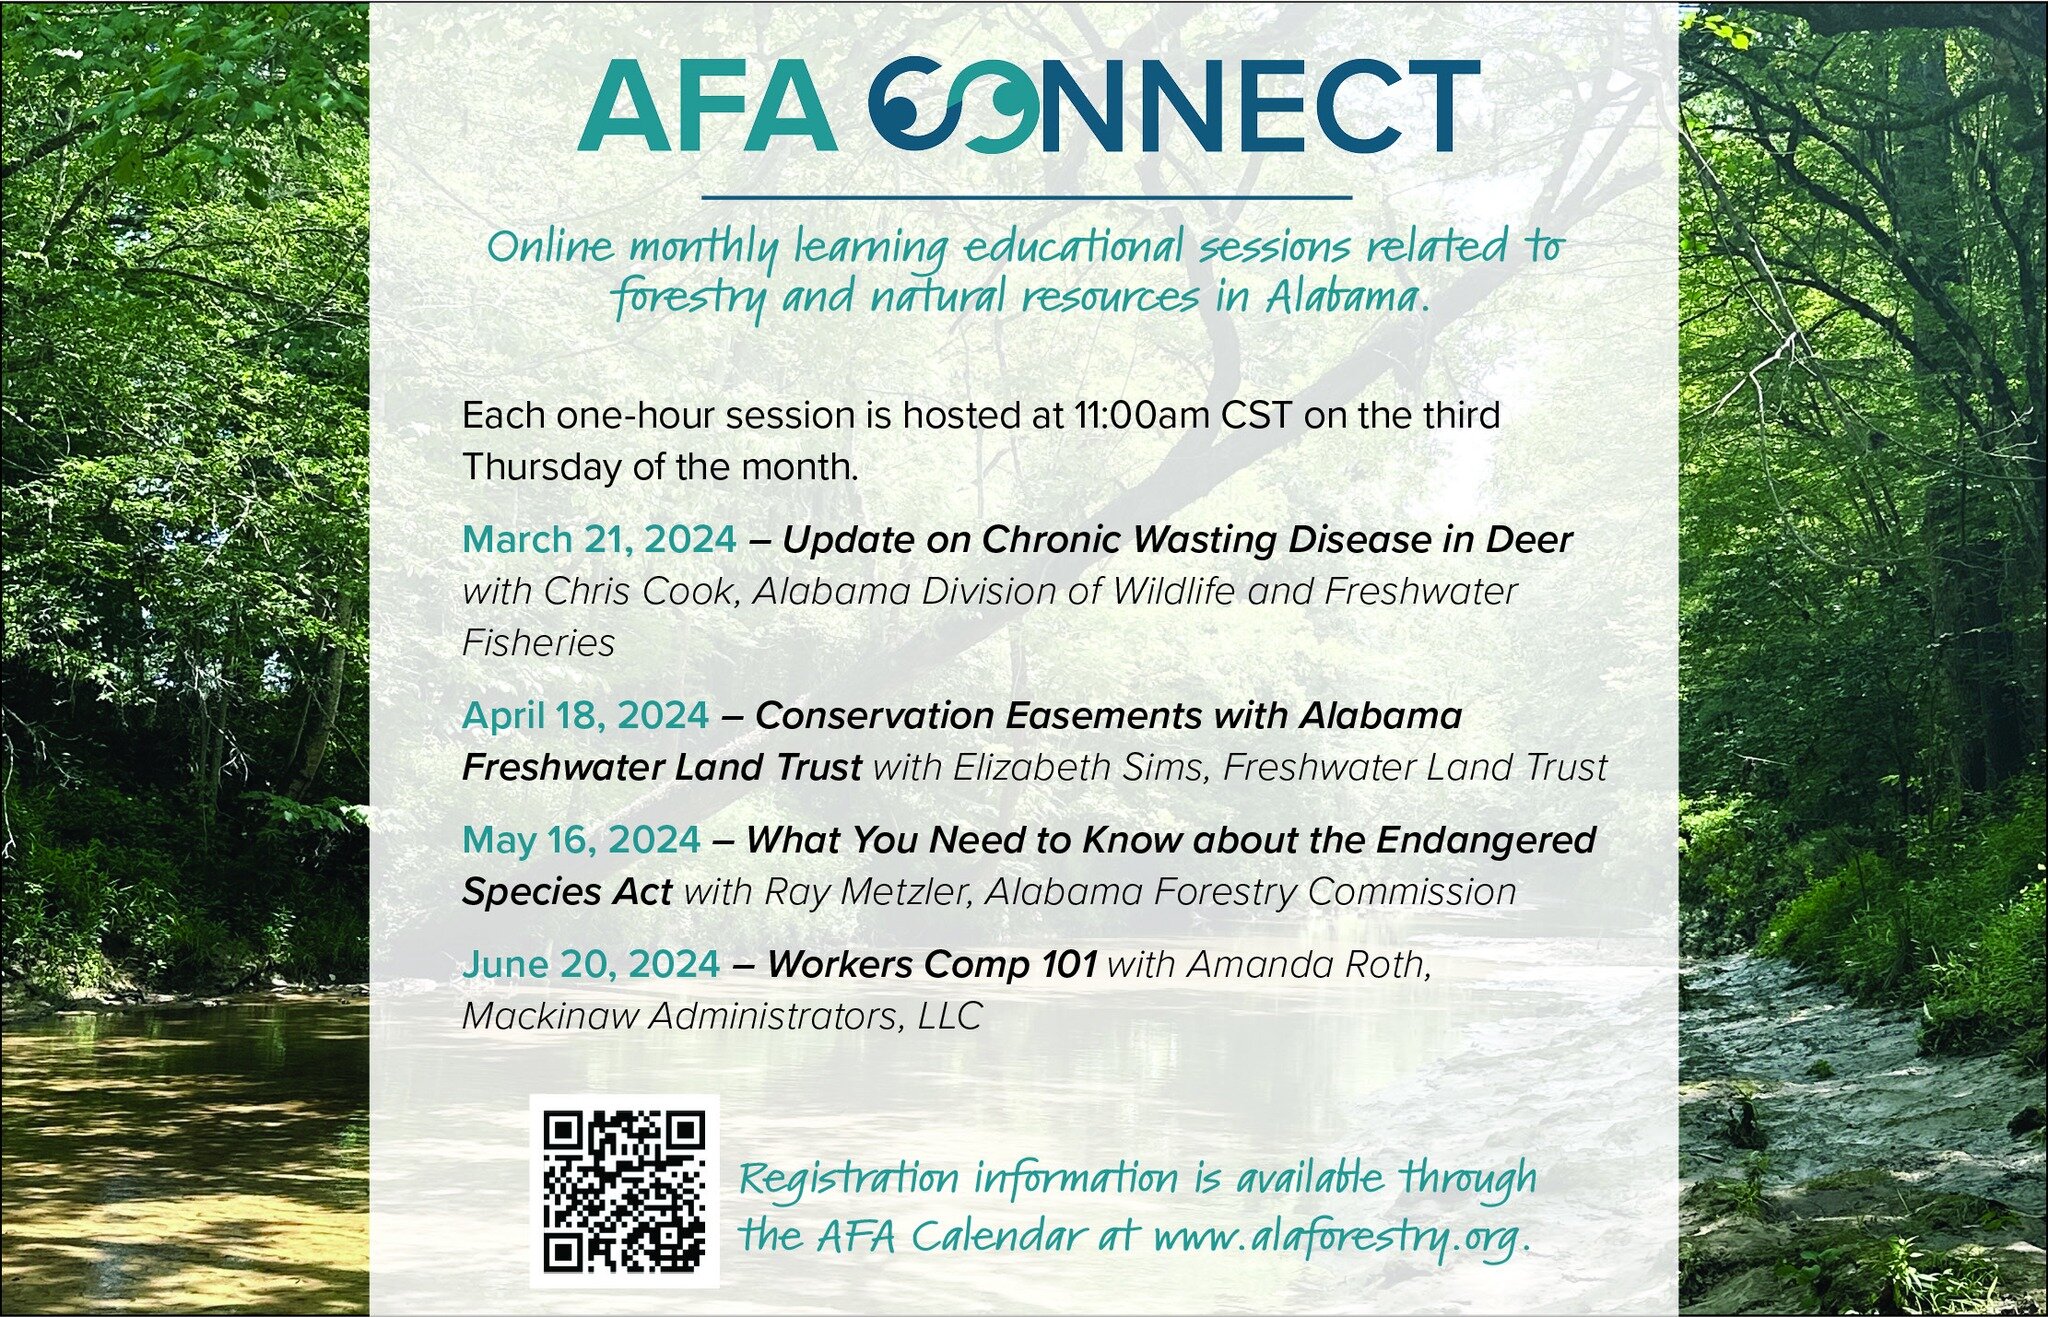 Each month, Alabama Forestry Association offers 'AFA Connect', a one hour online educational webinar. These sessions are free and open to anyone. 
See a topic coming up that interests you? You can scan the QR code or visit the AFA calendar at www.ala